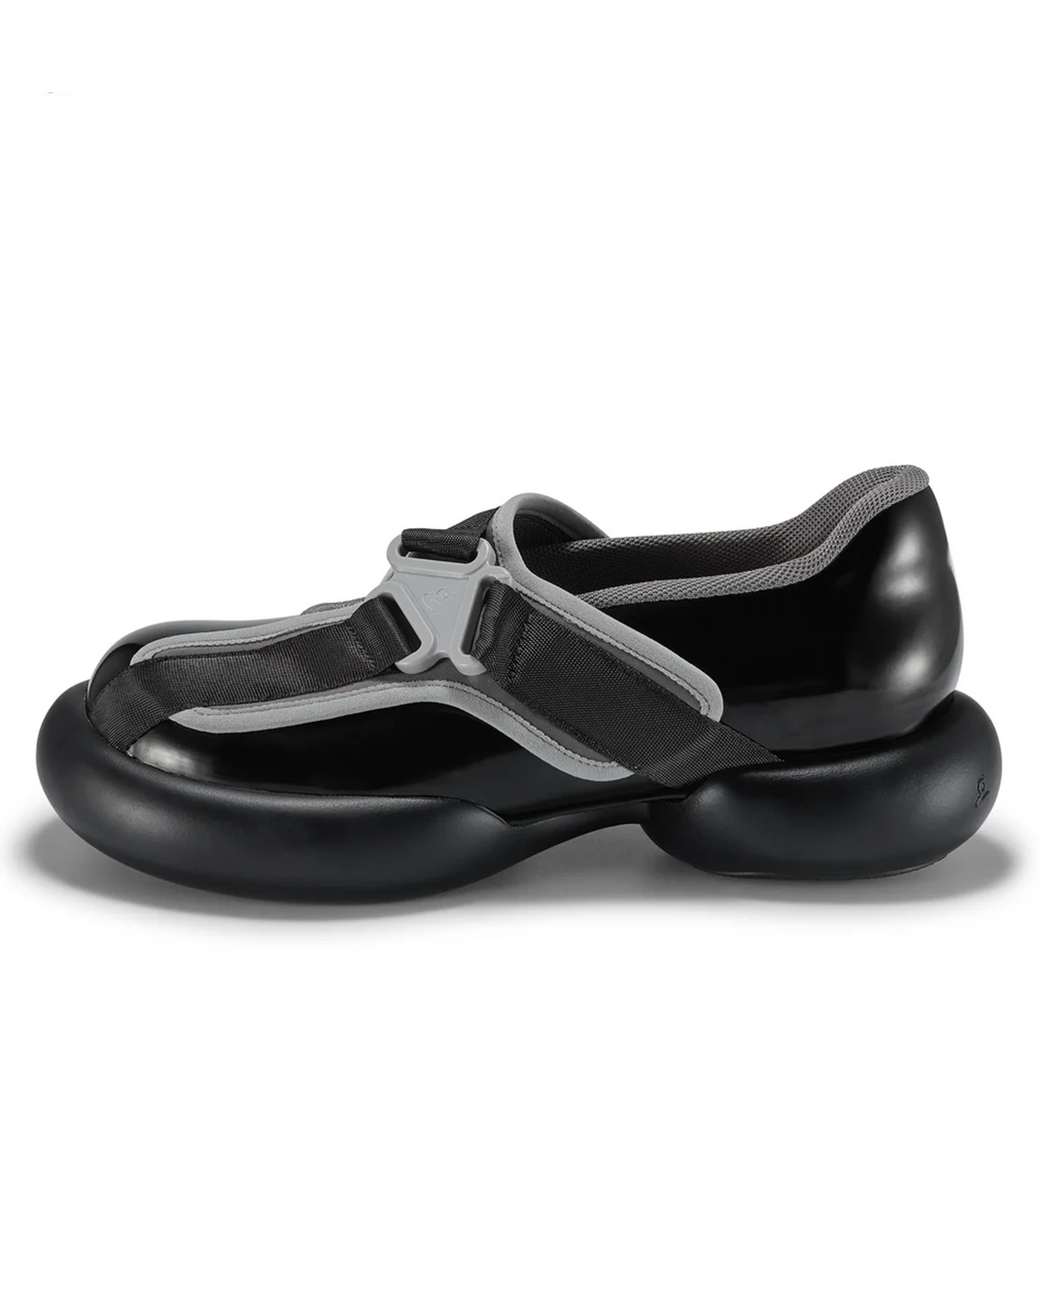 Black Safety Buckle Mary Jane Shoes